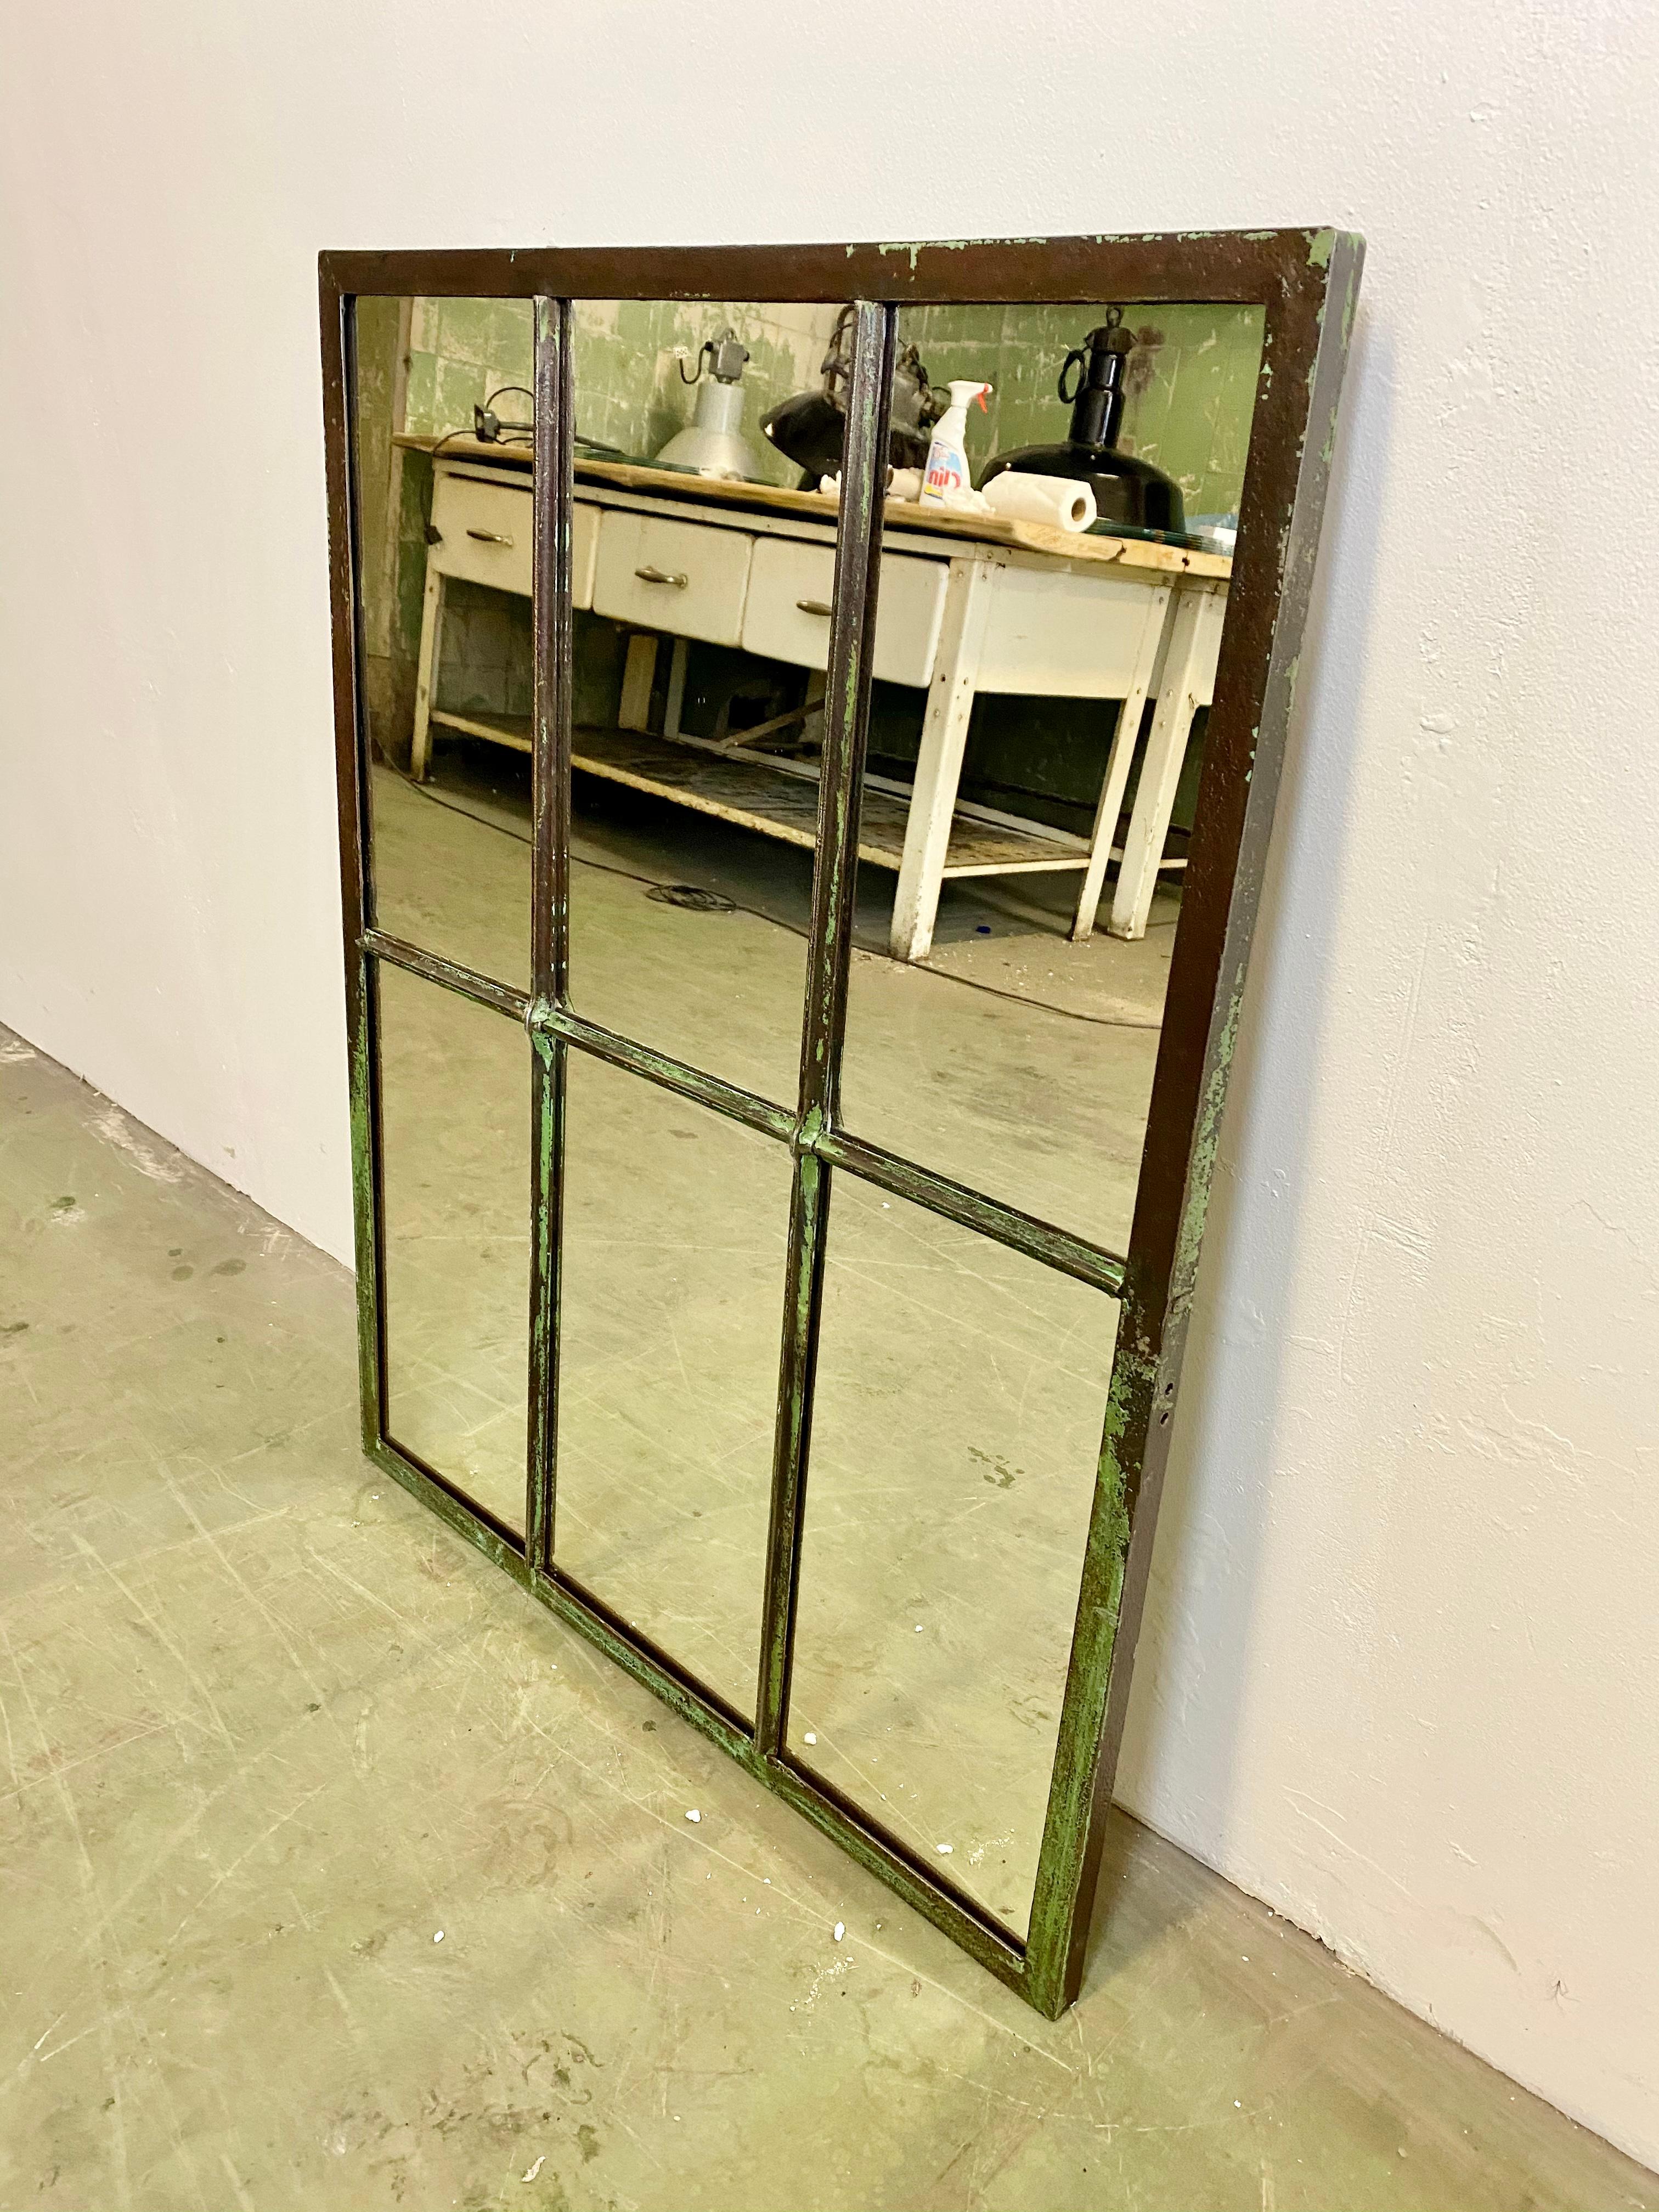 This iron industrial window frame has been transformed into a mirror. The weight of the mirror is 15 kg.